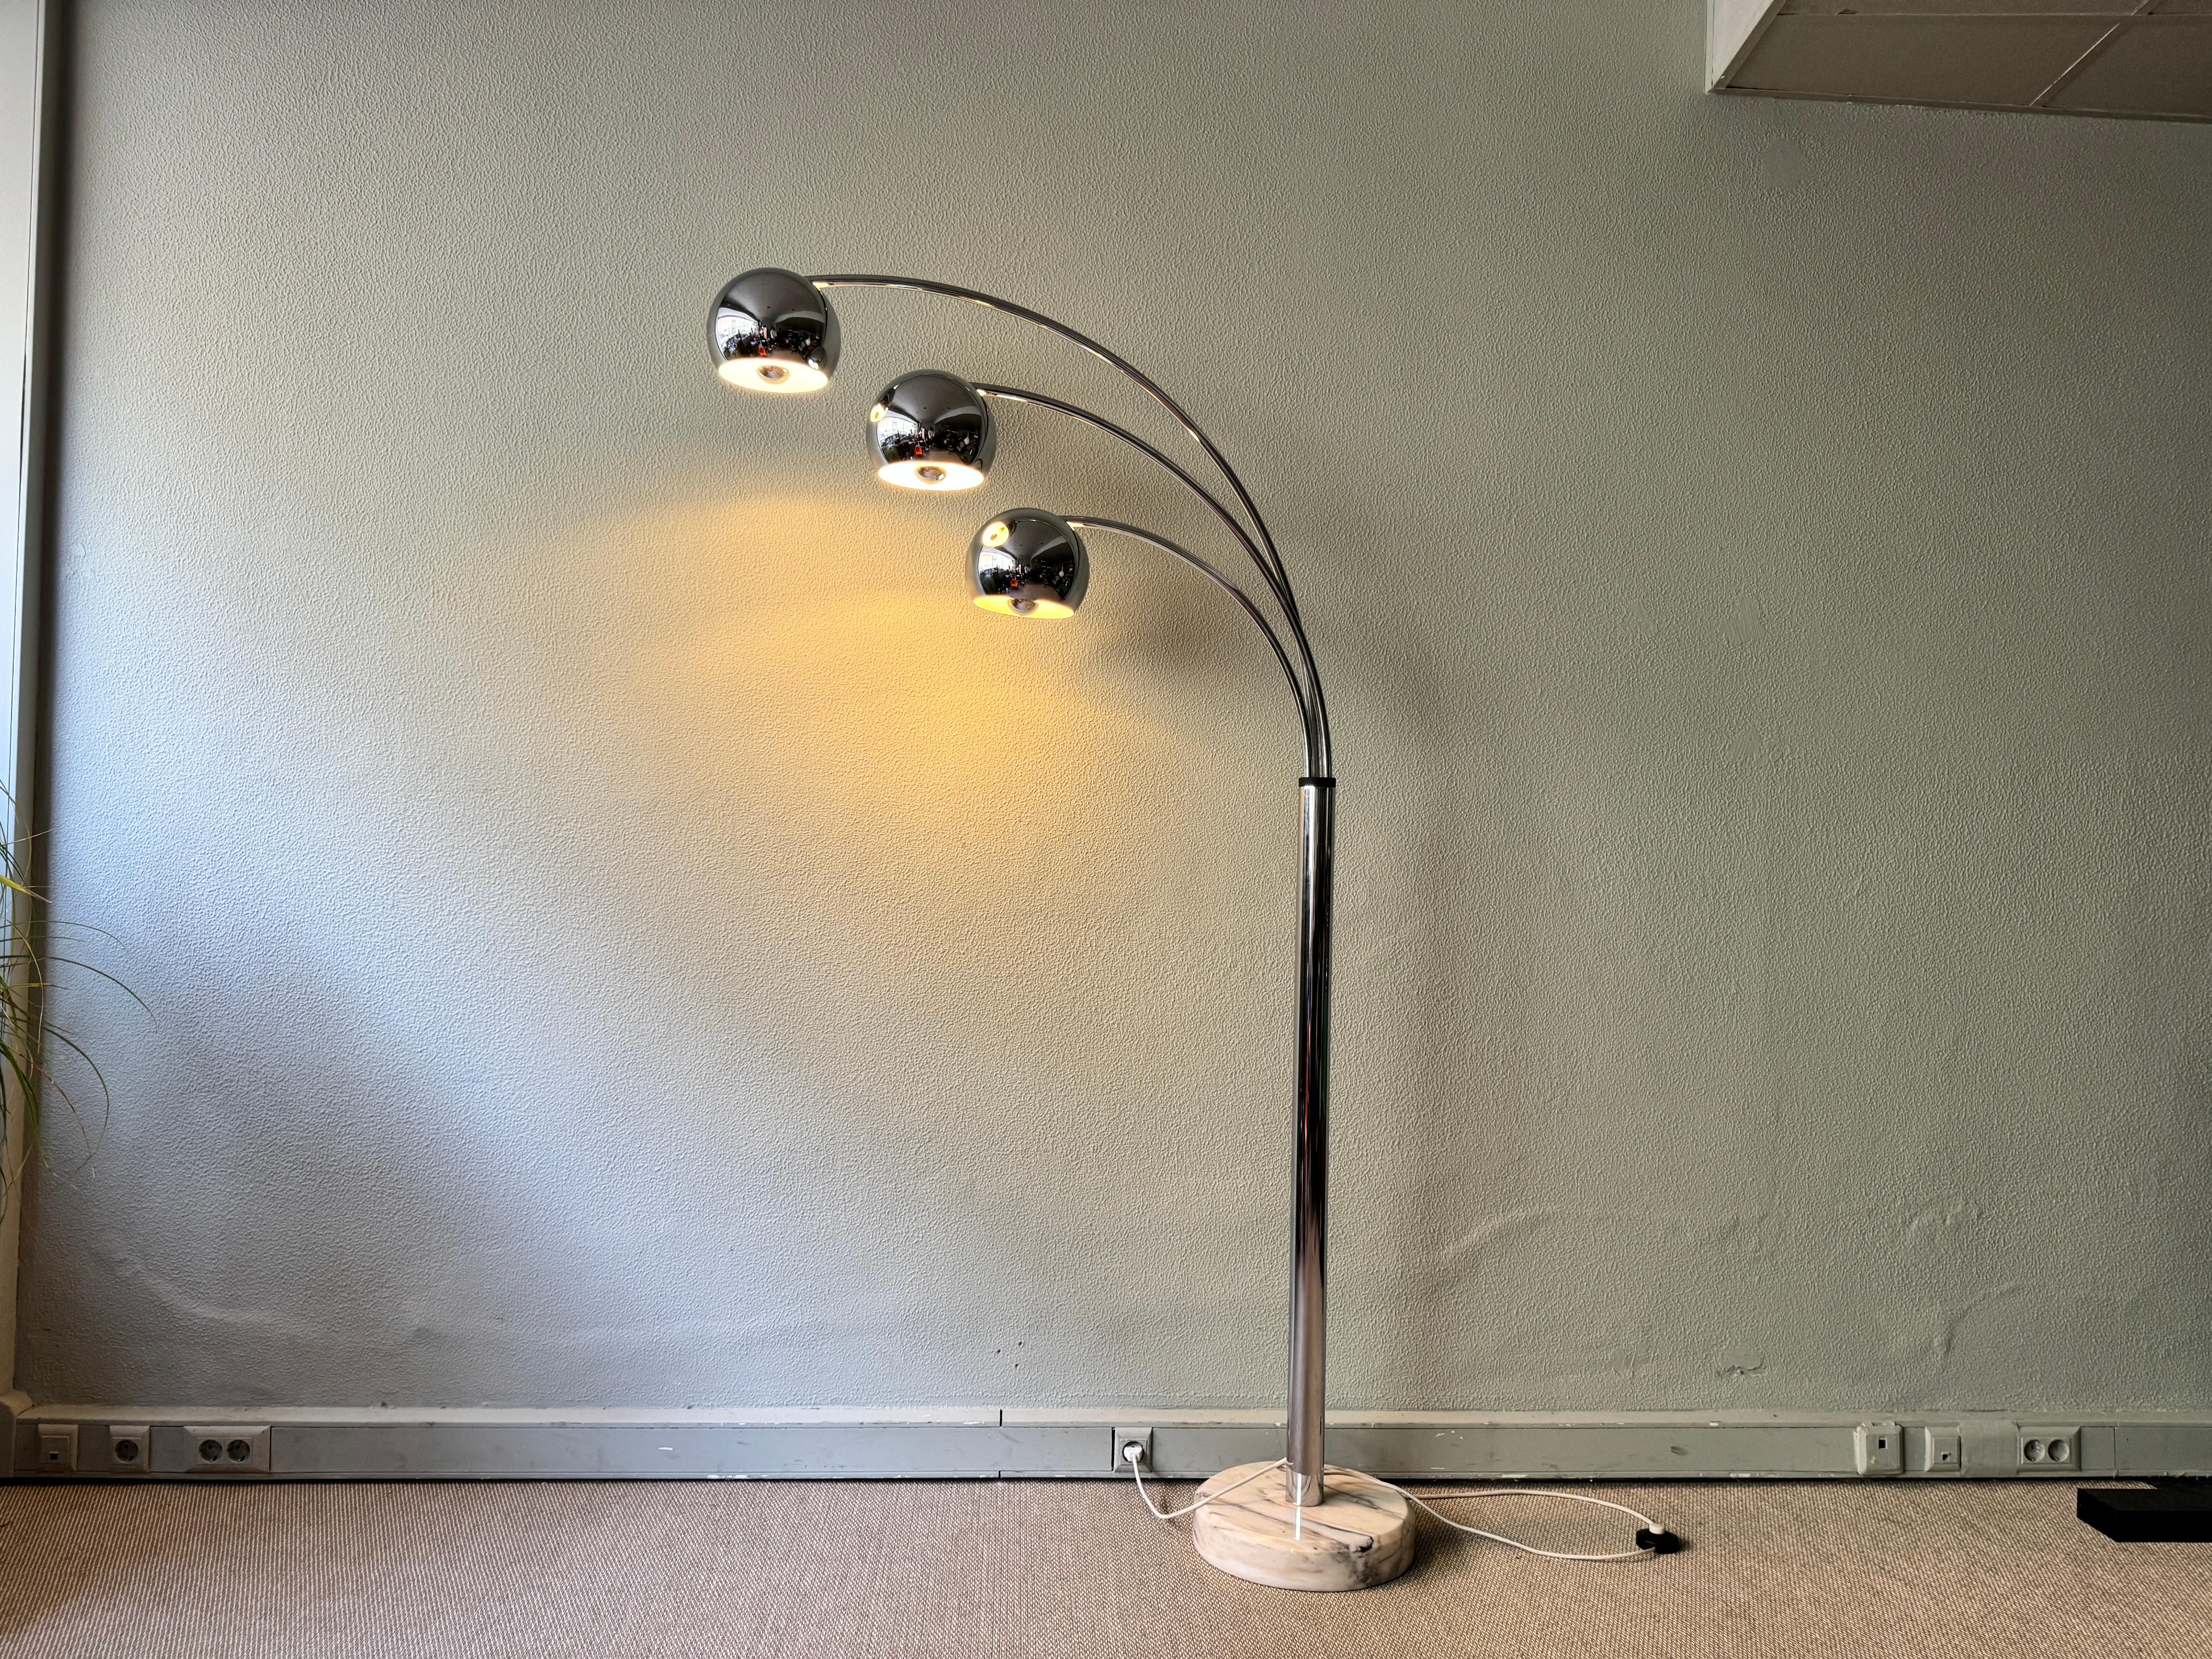 Late 20th Century Italian Chromed Steel Floor Lamp with Three Arms by Goffredo Reggiani, 1970s For Sale